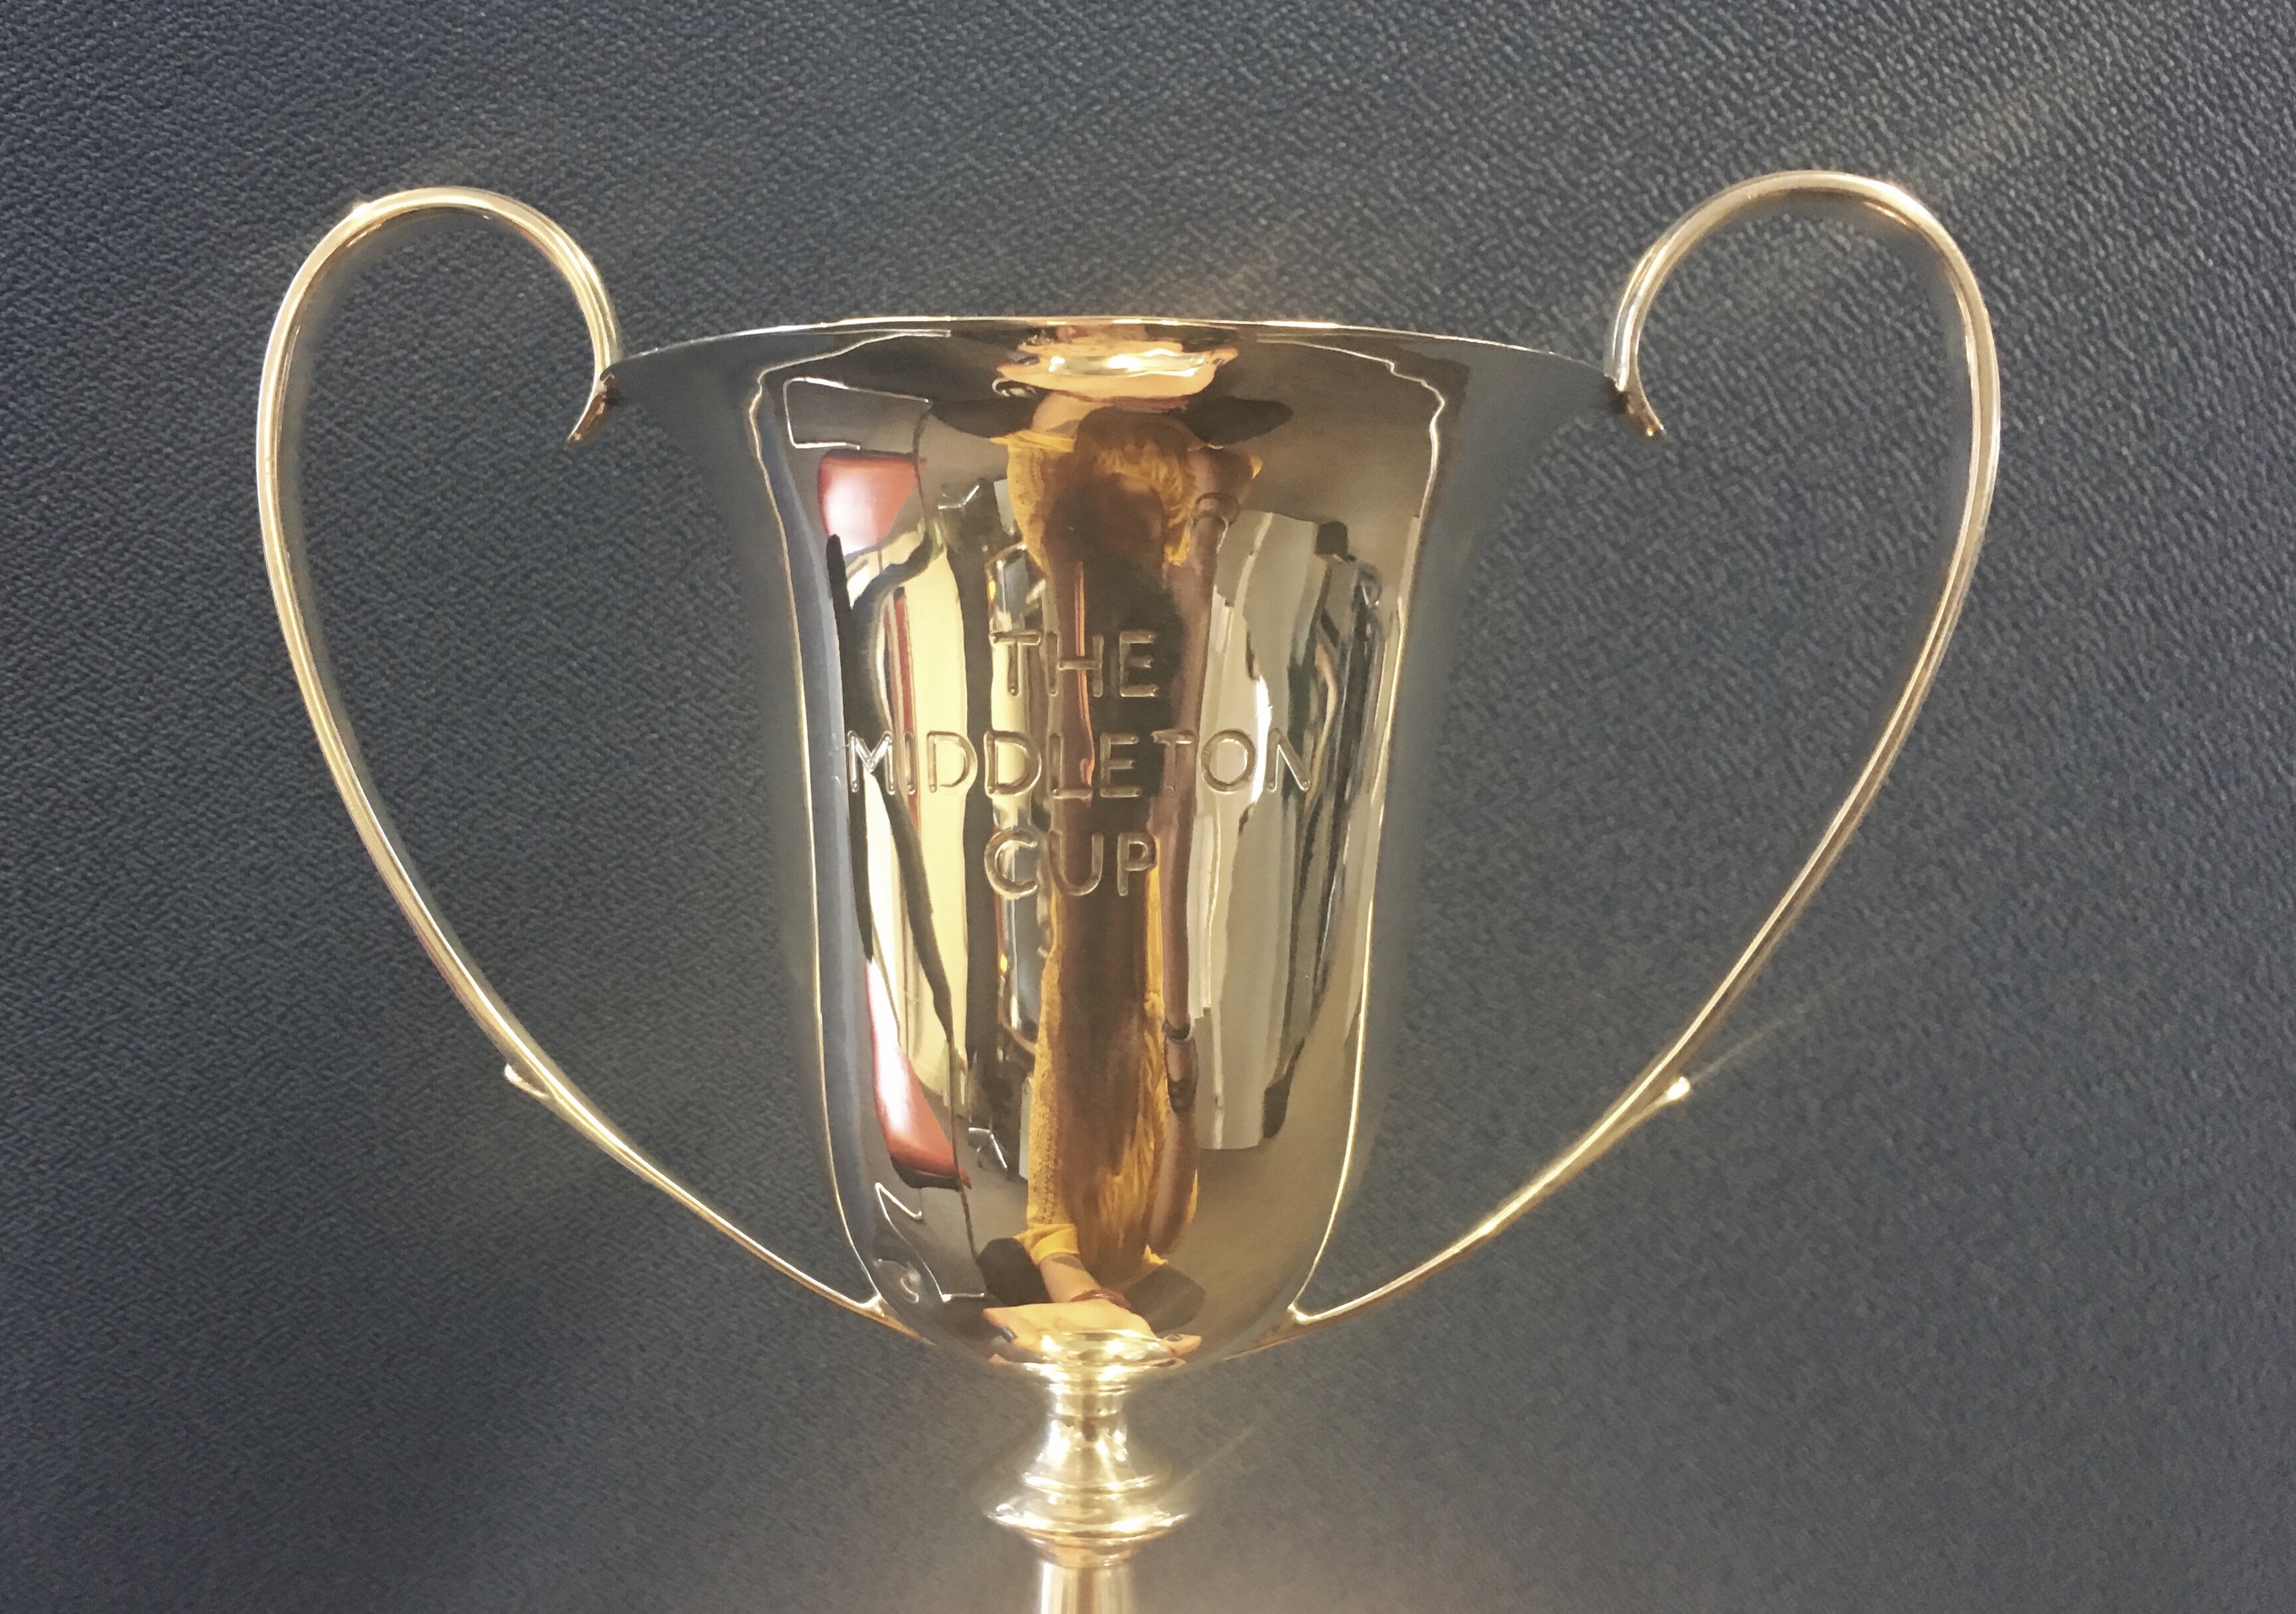 Middleton Cup